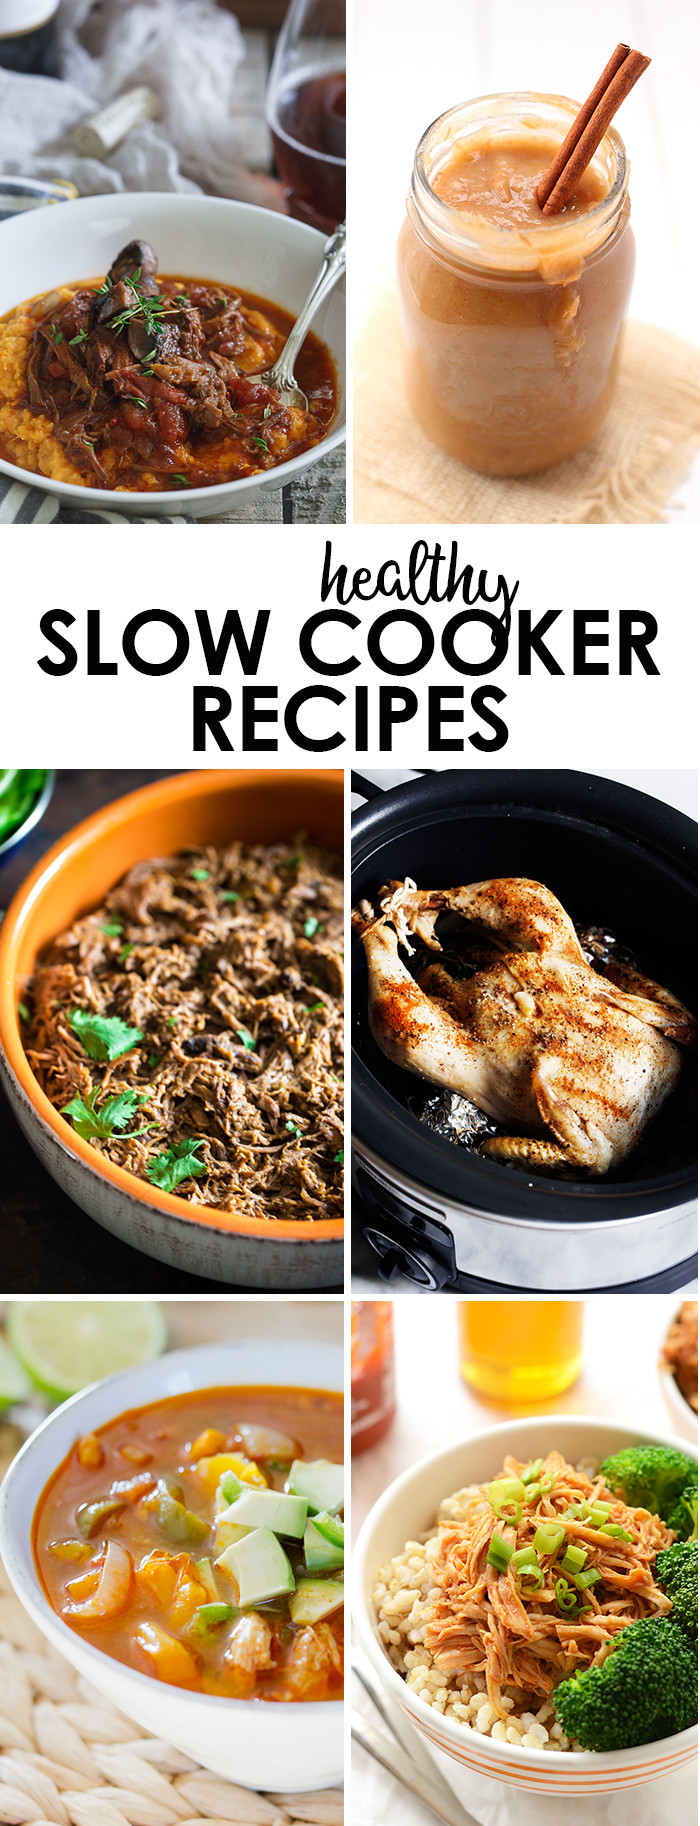 Healthy Slow Cooker Chicken Recipes
 5 Ingre nt Honey Sriracha Slow Cooker Chicken Fit